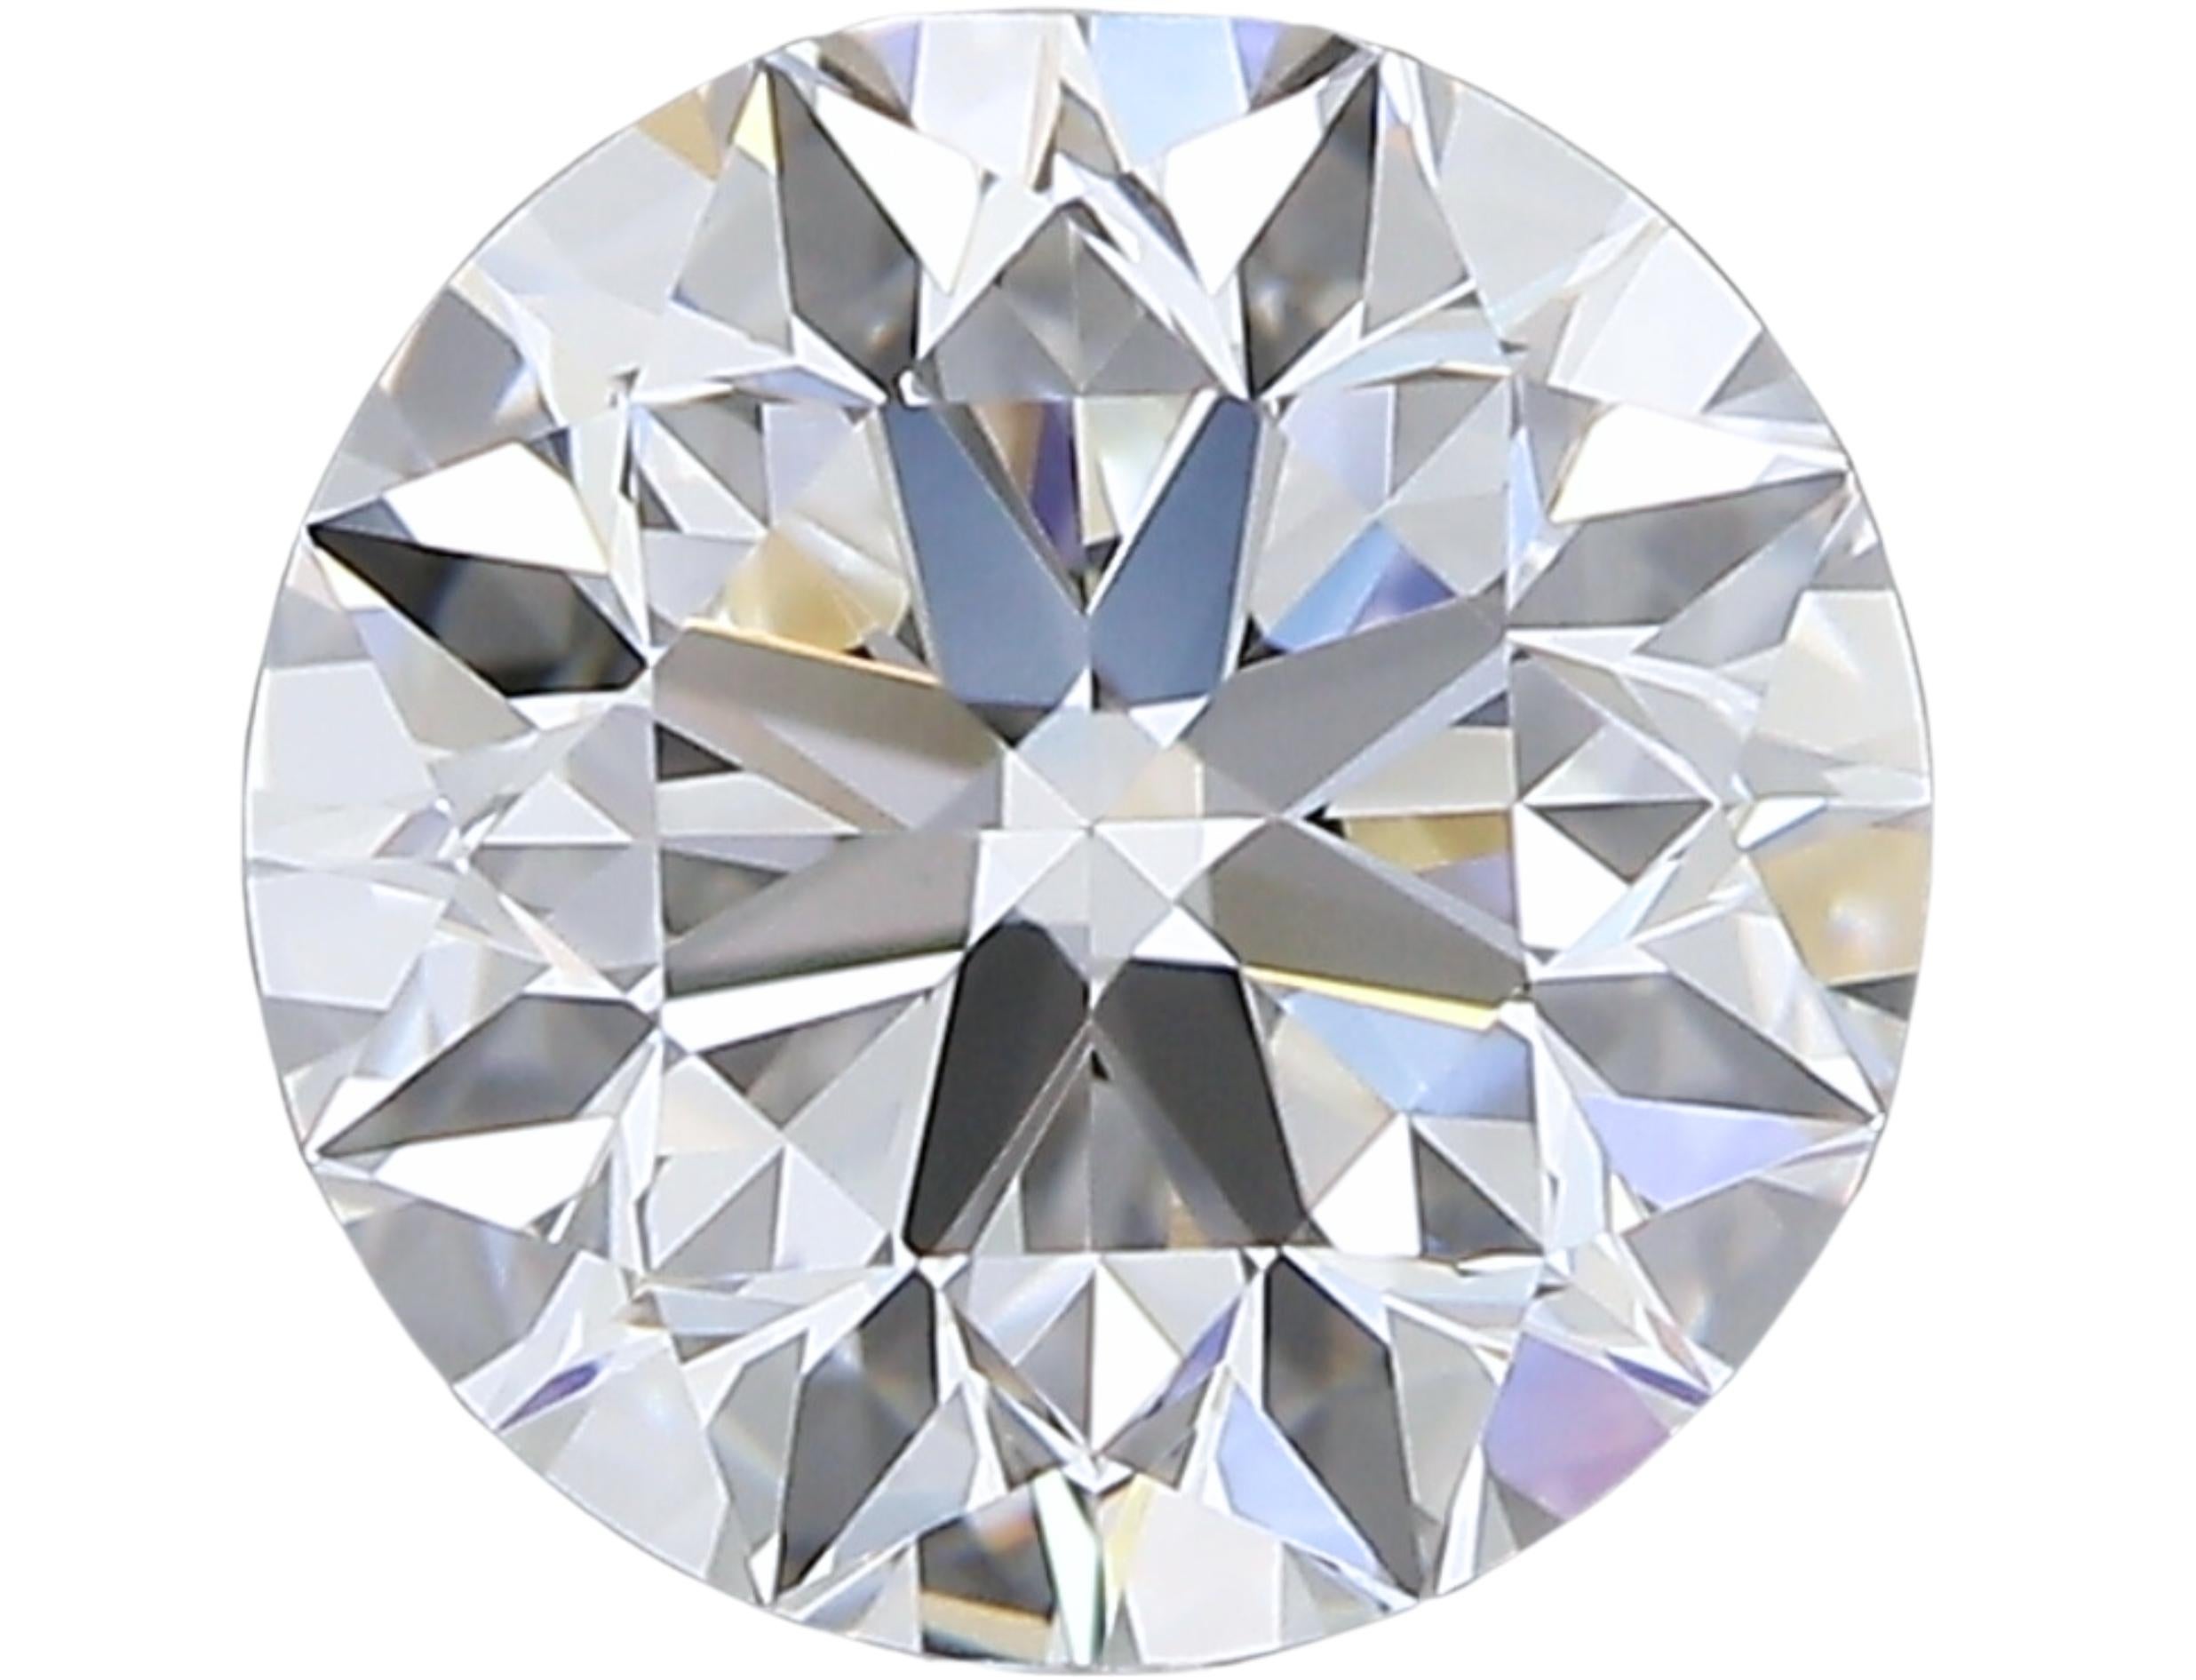 Natural cut Round diamond in a .90 carat H VVS1Excellent cut. This diamond comes with GIA Certificate and laser inscription number

This exquisite diamond boasts a remarkable .90 carat weight and is meticulously cut to perfection, earning it an